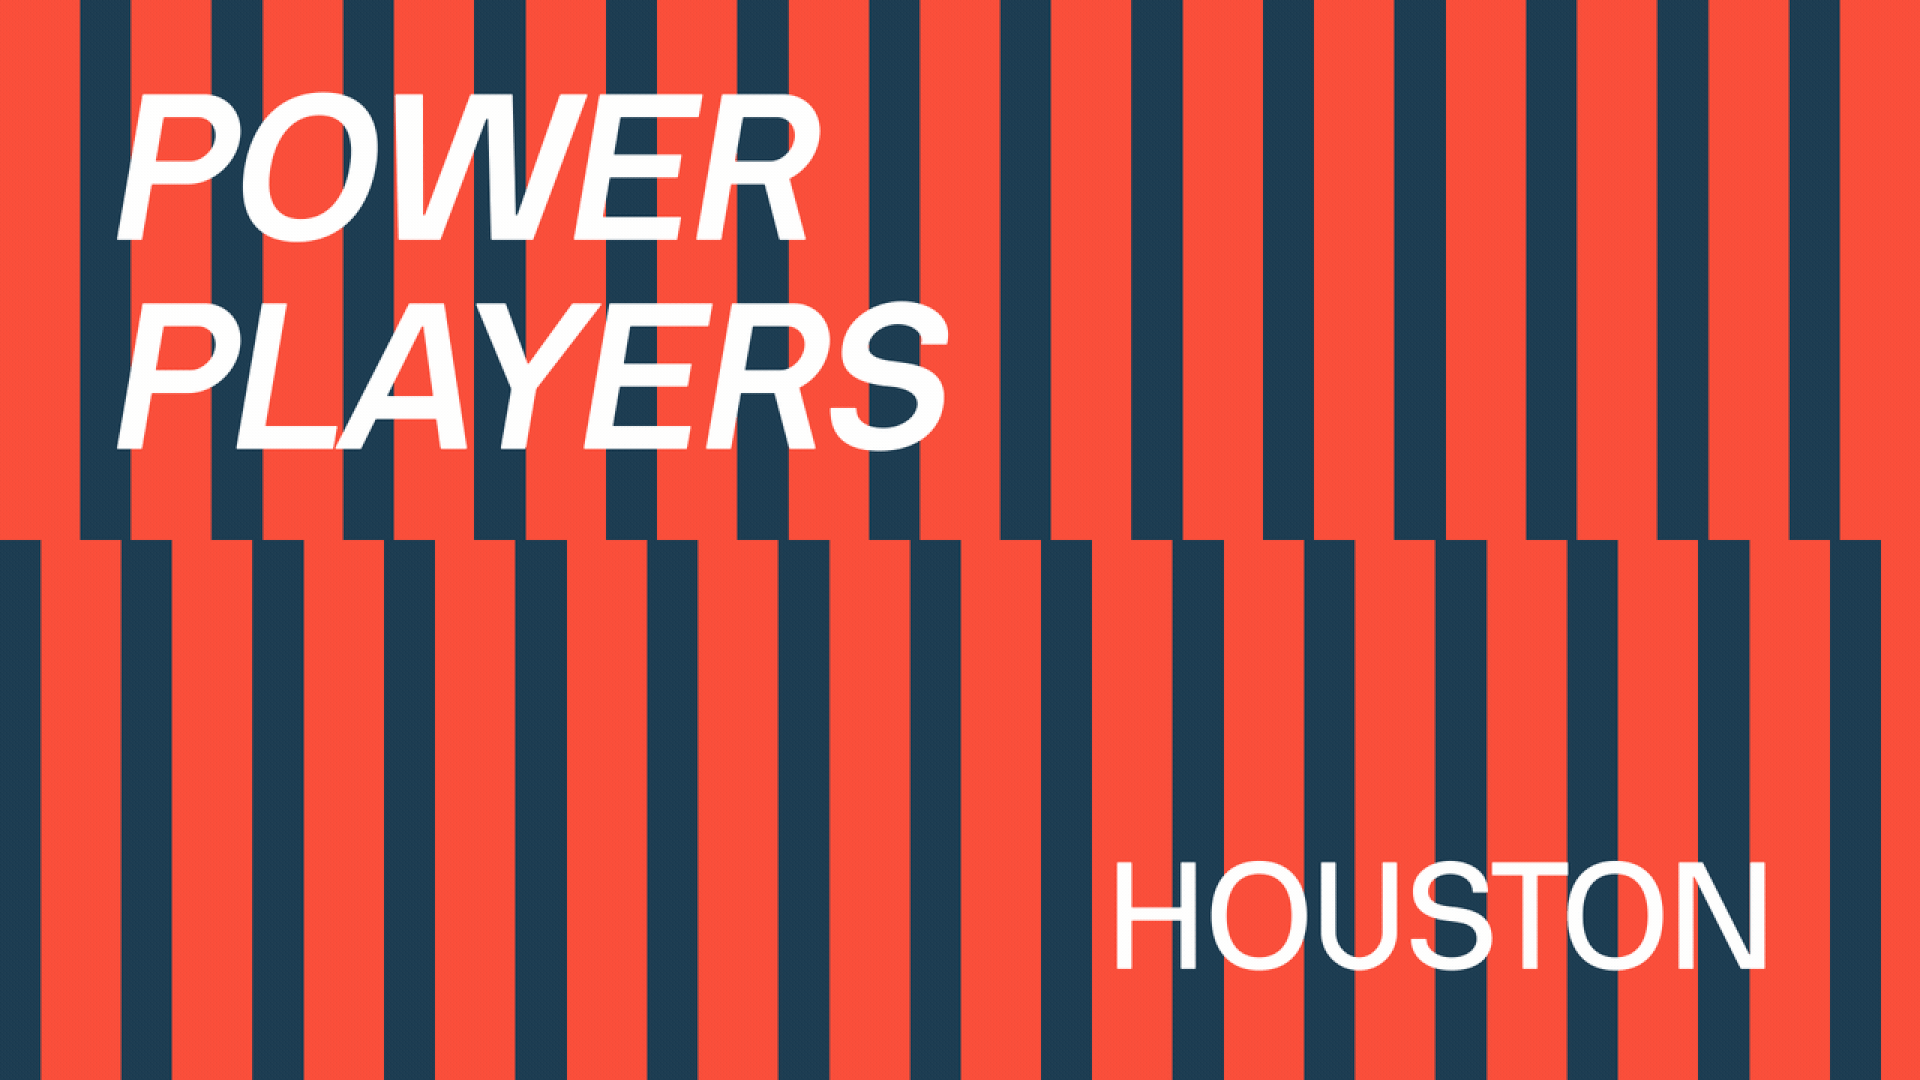 Illustration of two rows of dominos falling with text overlaid that reads Power Players Houston.